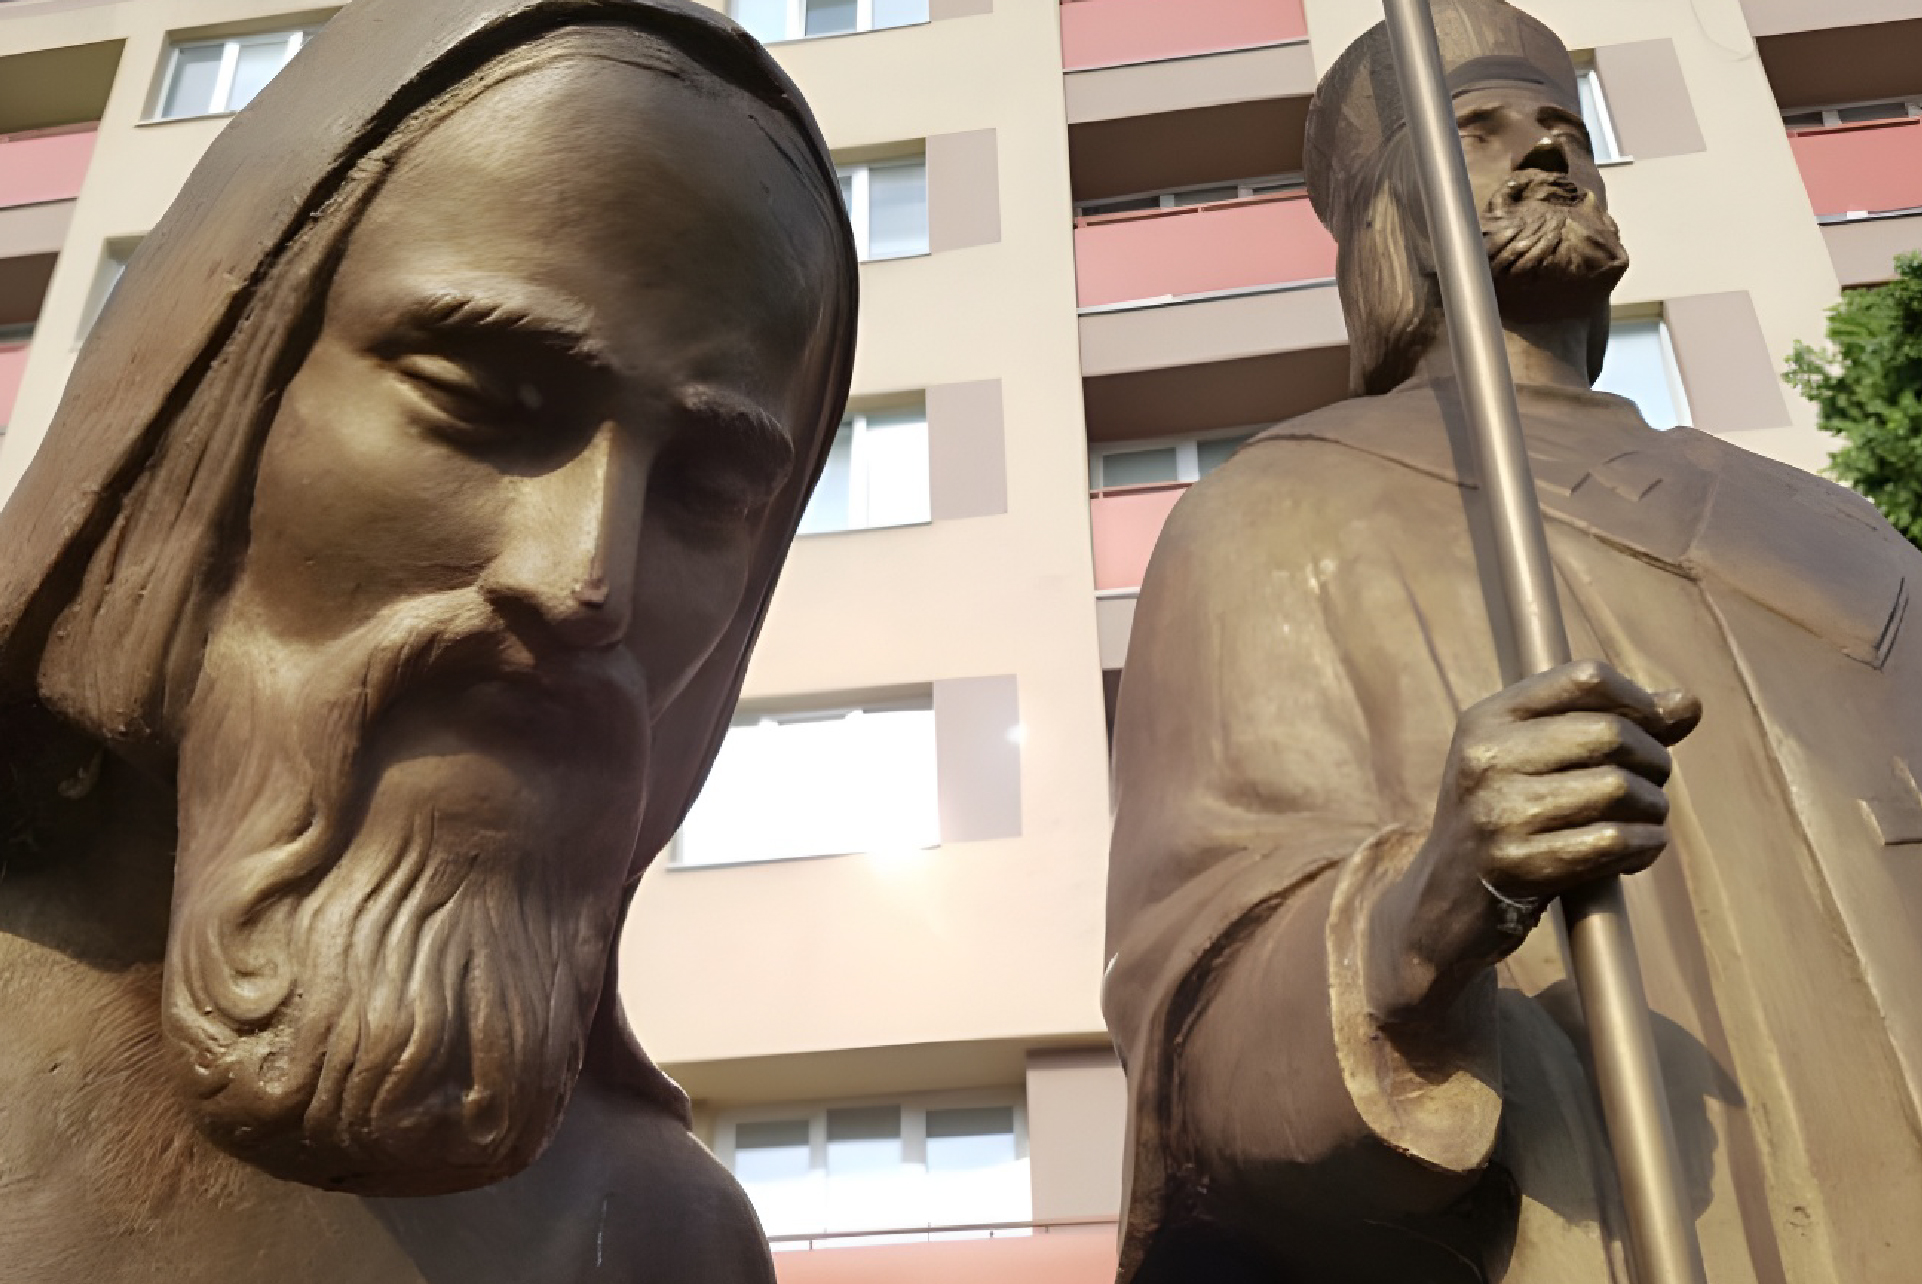 At UCM in Trnava we commemorate the legacy of Sts. Cyril and Methodius